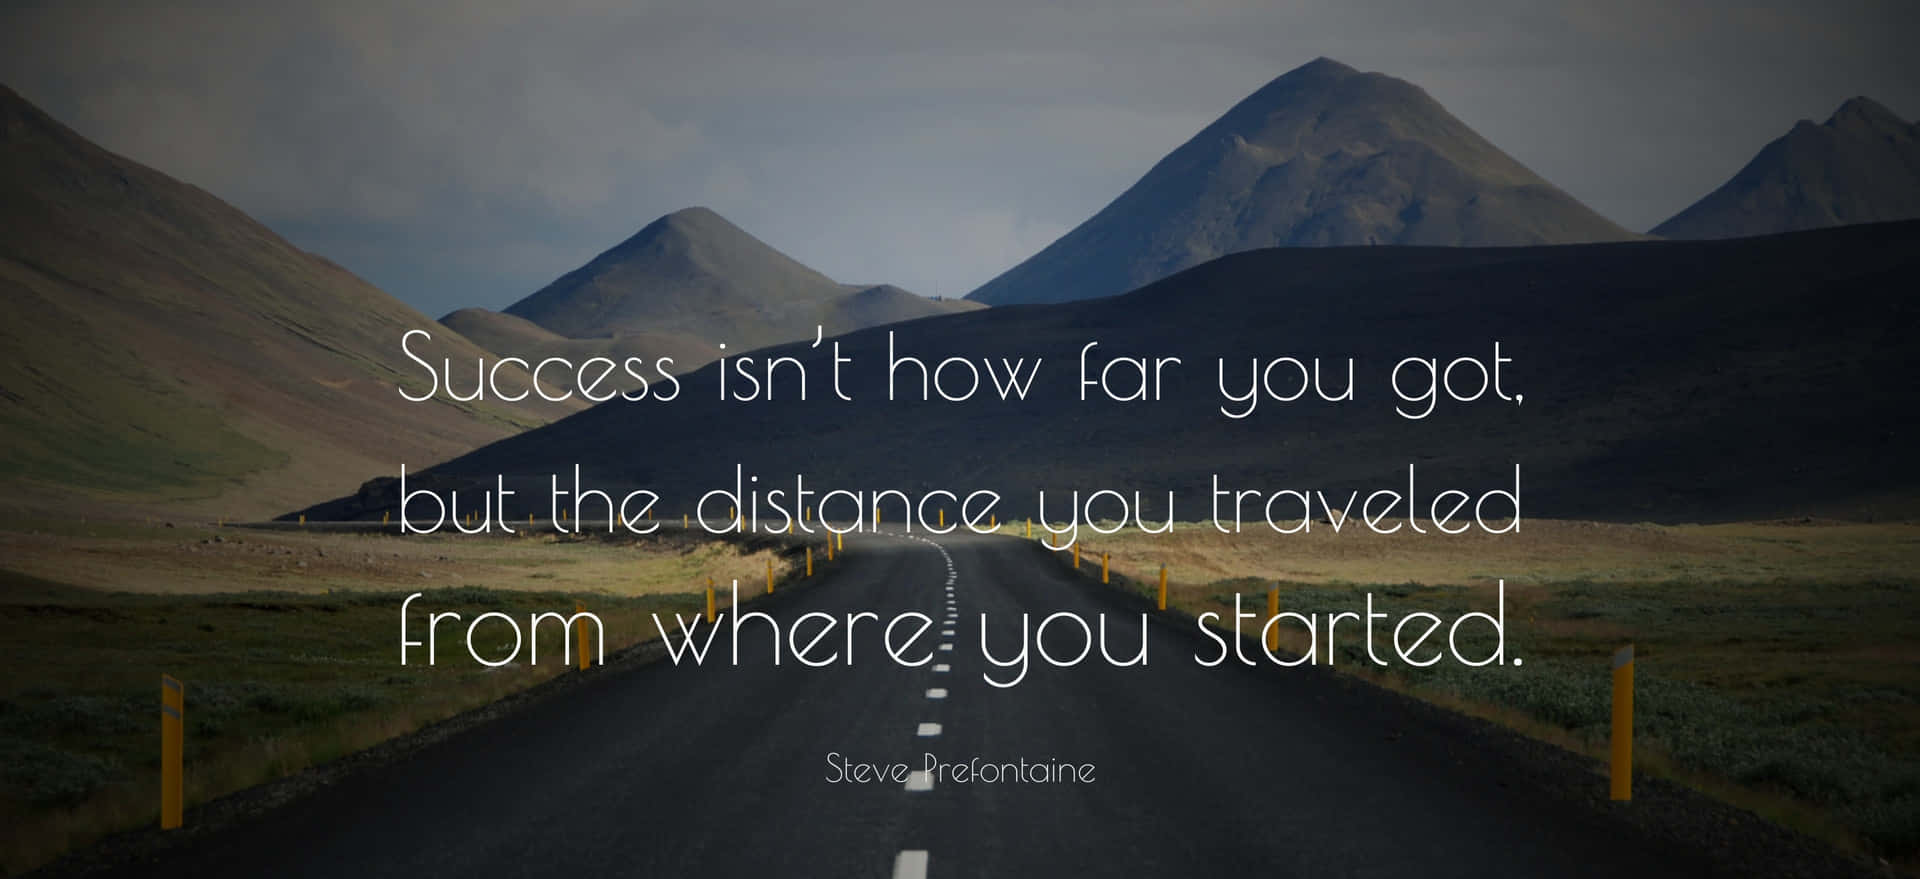 Success Isn't How You Got To The Distance You Traveled From Where You Started